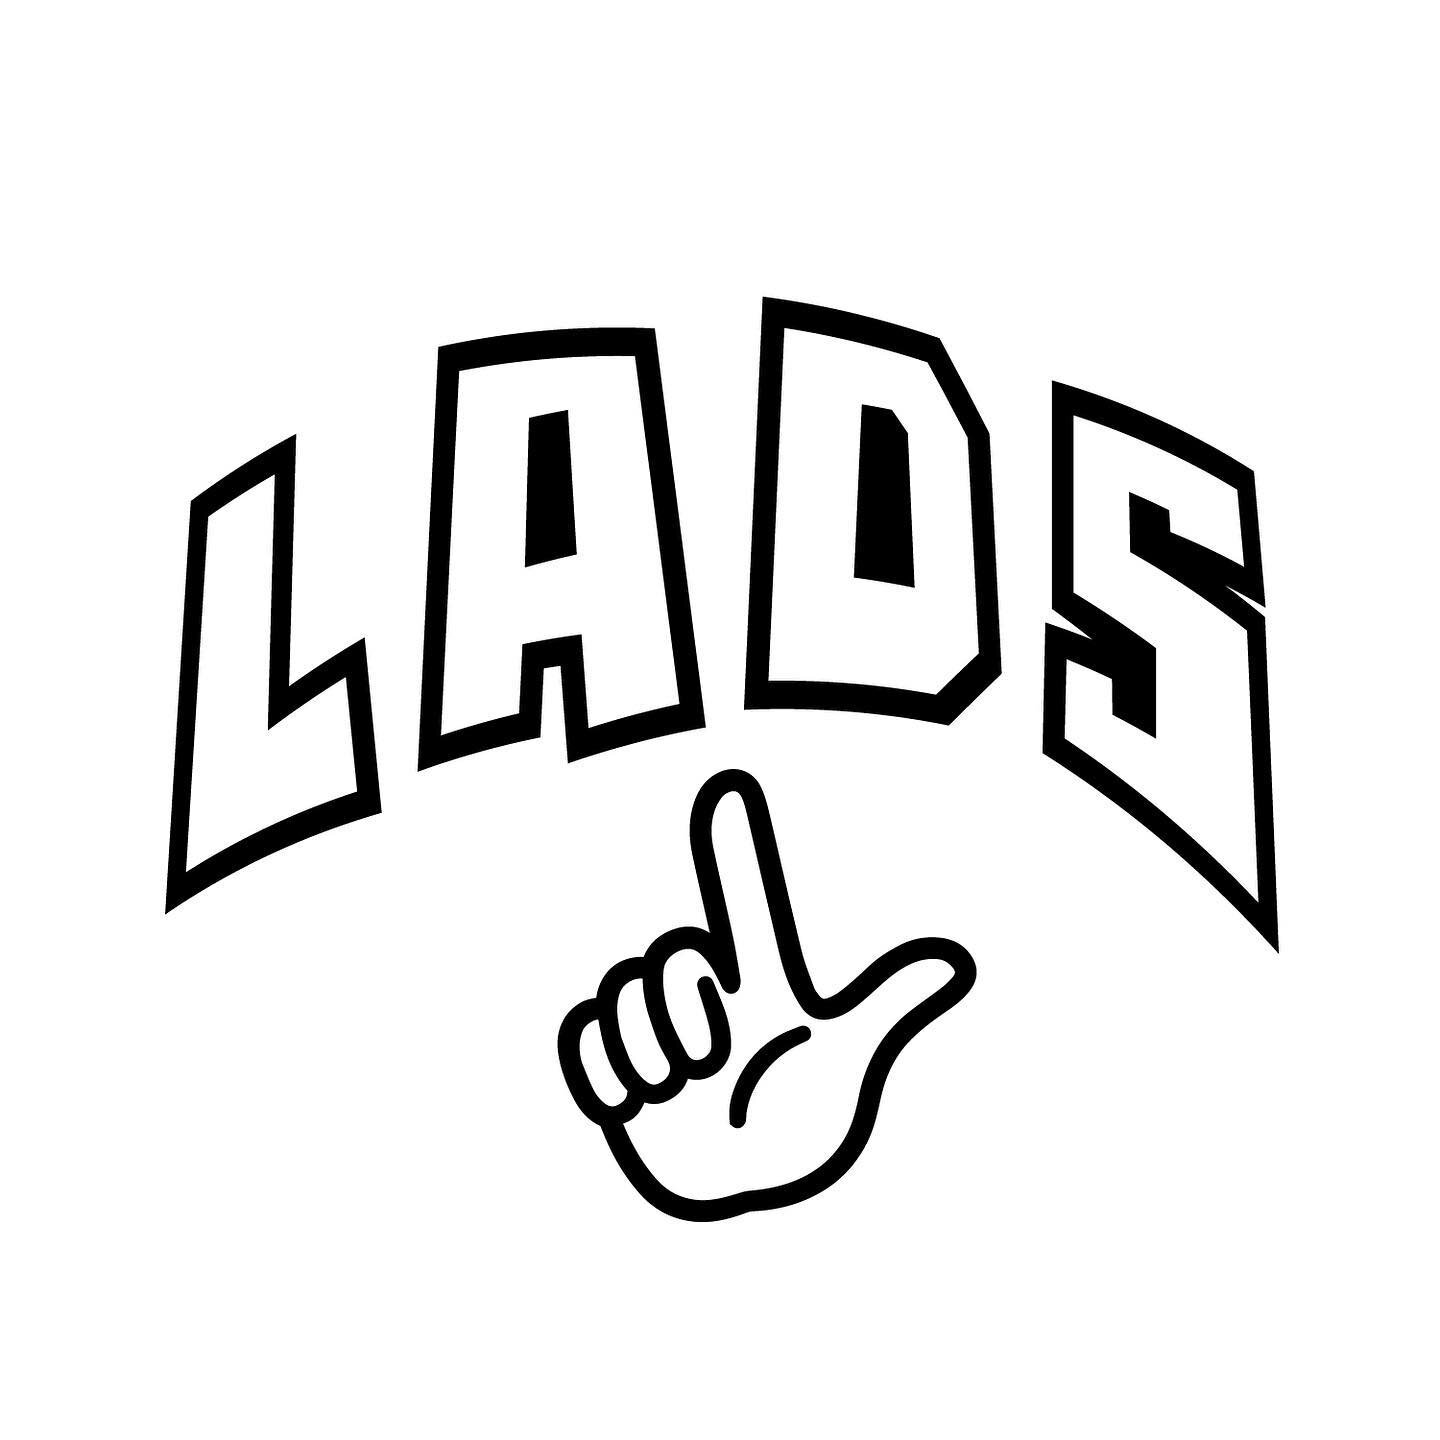 Logo design comps for LADs band (LameAssDads) logo. Where the L stands for Lame! 🤘🏻😄 @lameassdads 
:
:
#lunalilydesigns #graphicdesign #graphicdesigner #logodesigns #logodesign #logodesigner #branding #marketing #ohiopunkrock #ohiopunk